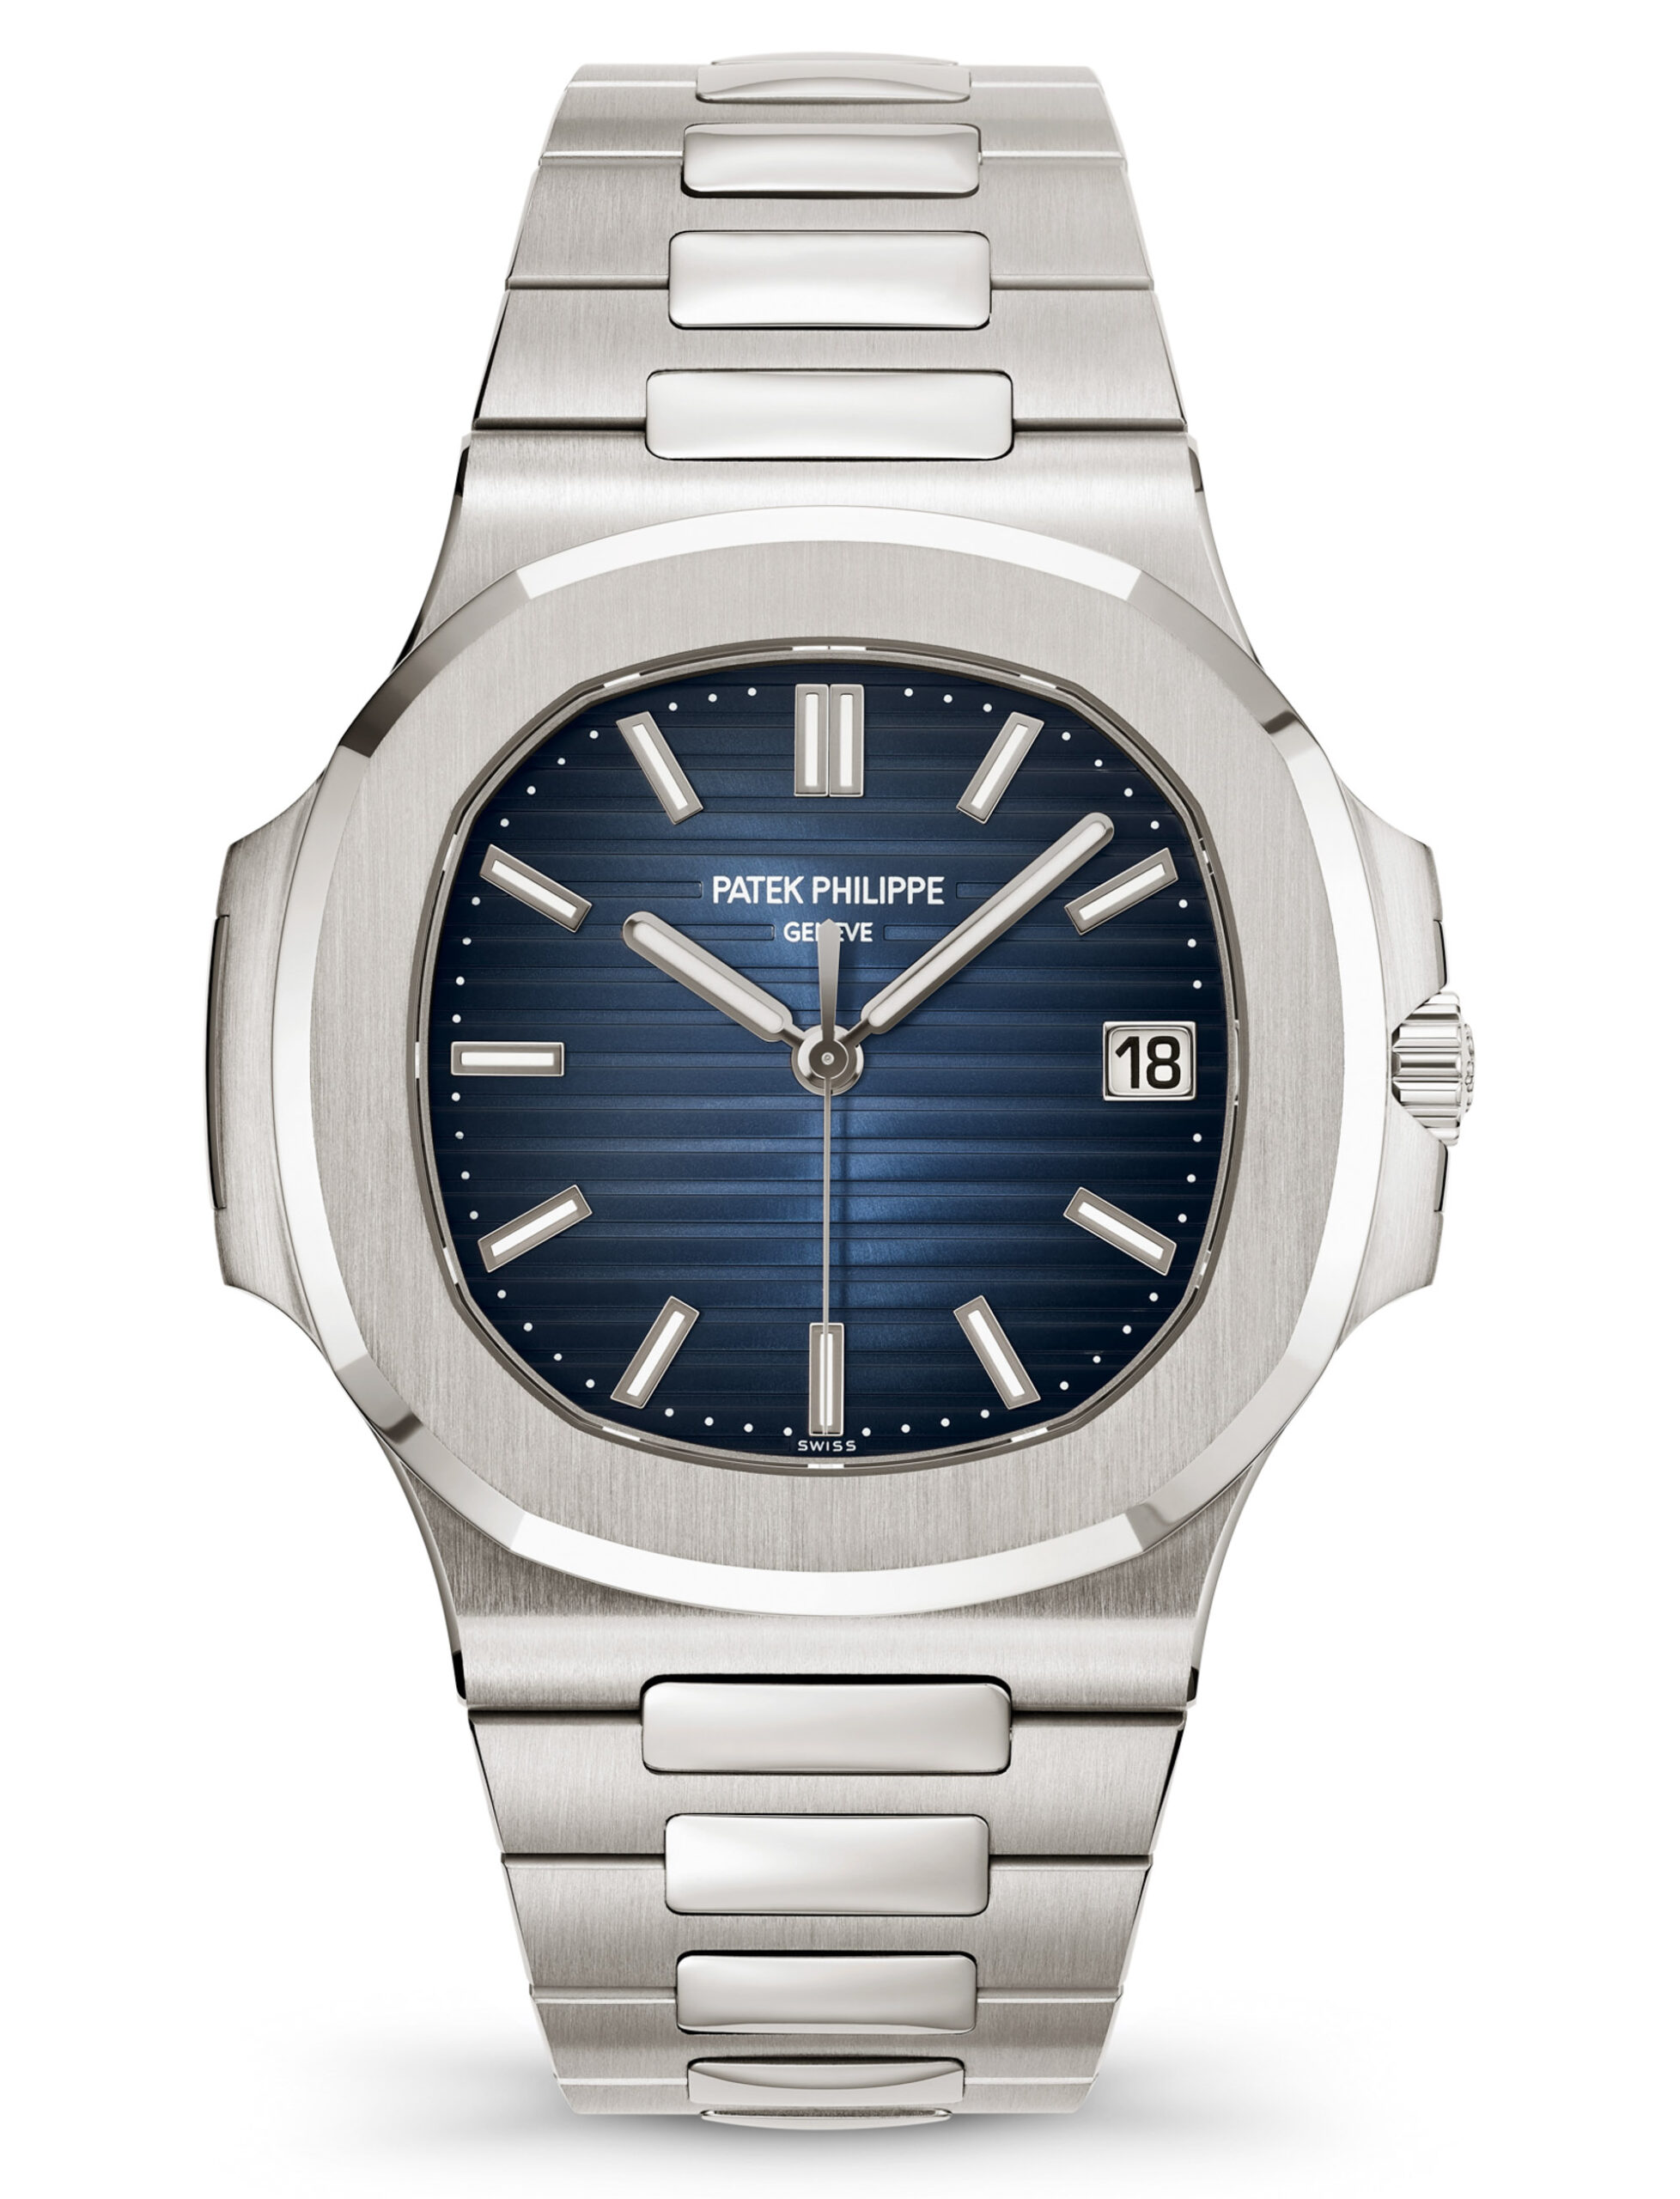 How Much Does It Cost to Get a Patek Philippe Watch in 2022?